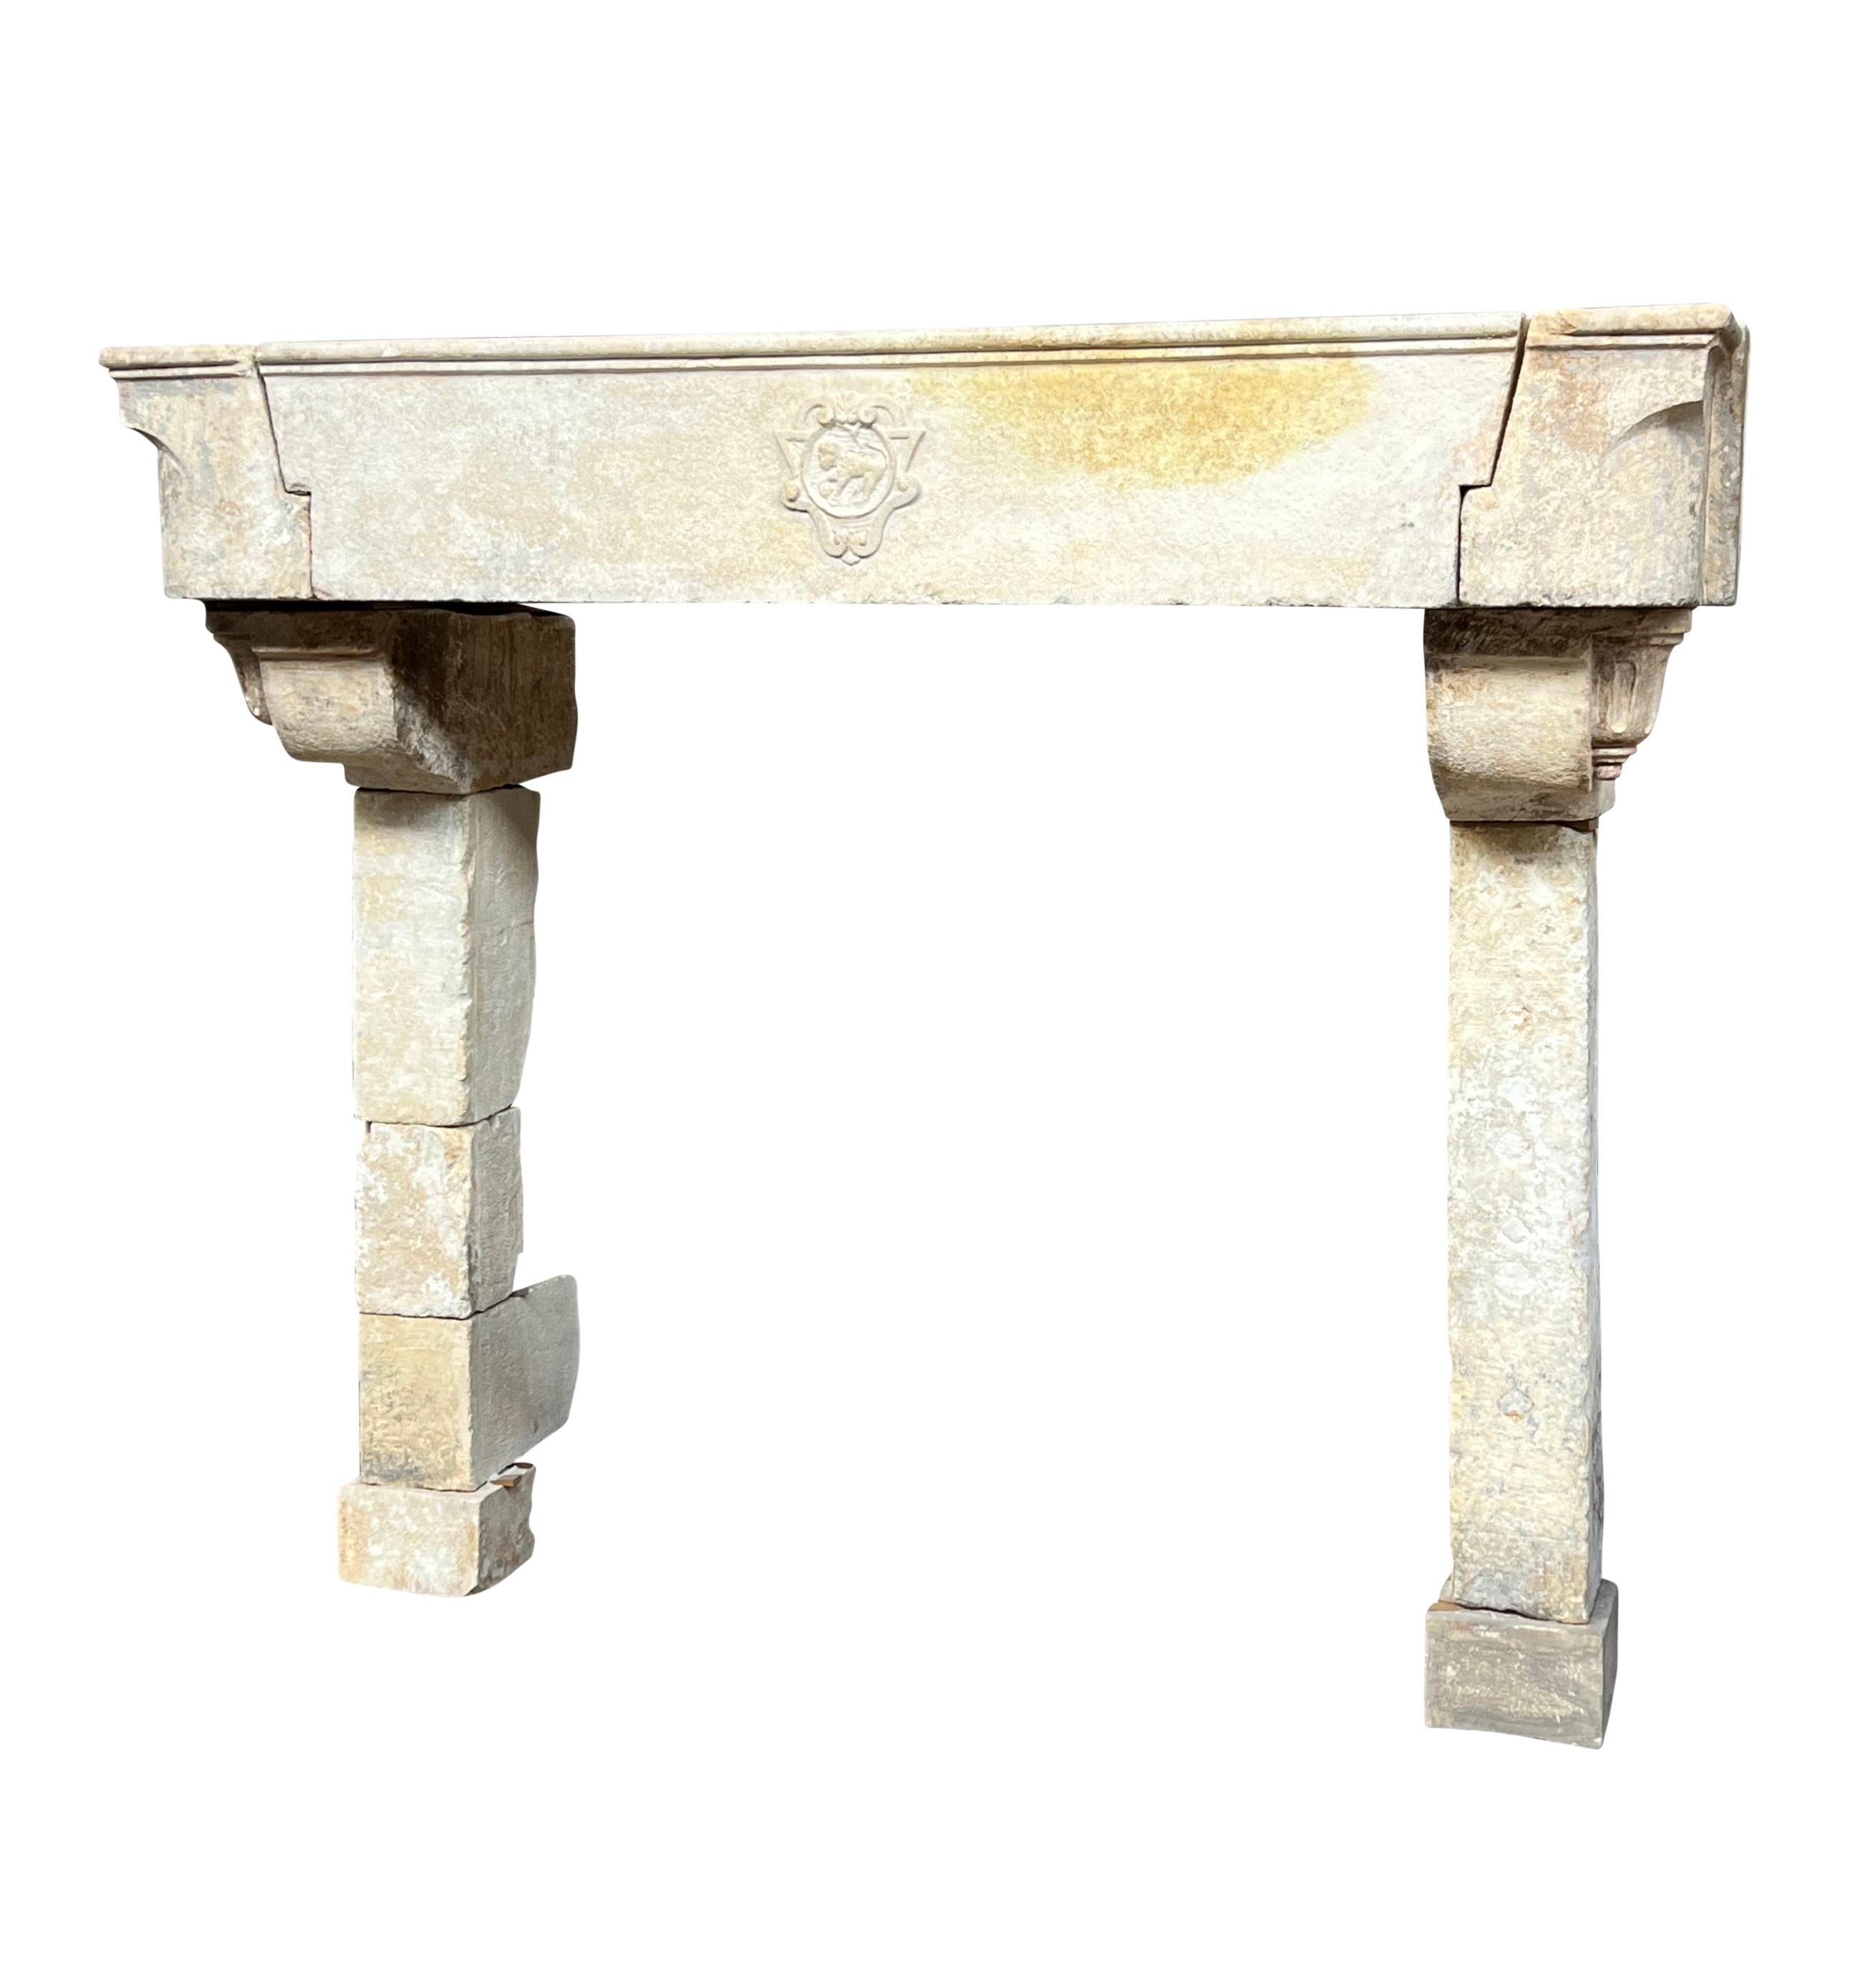 Grand French Cottage Chateau Fireplace In Limestone With Lion Detail In Good Condition For Sale In Beervelde, BE